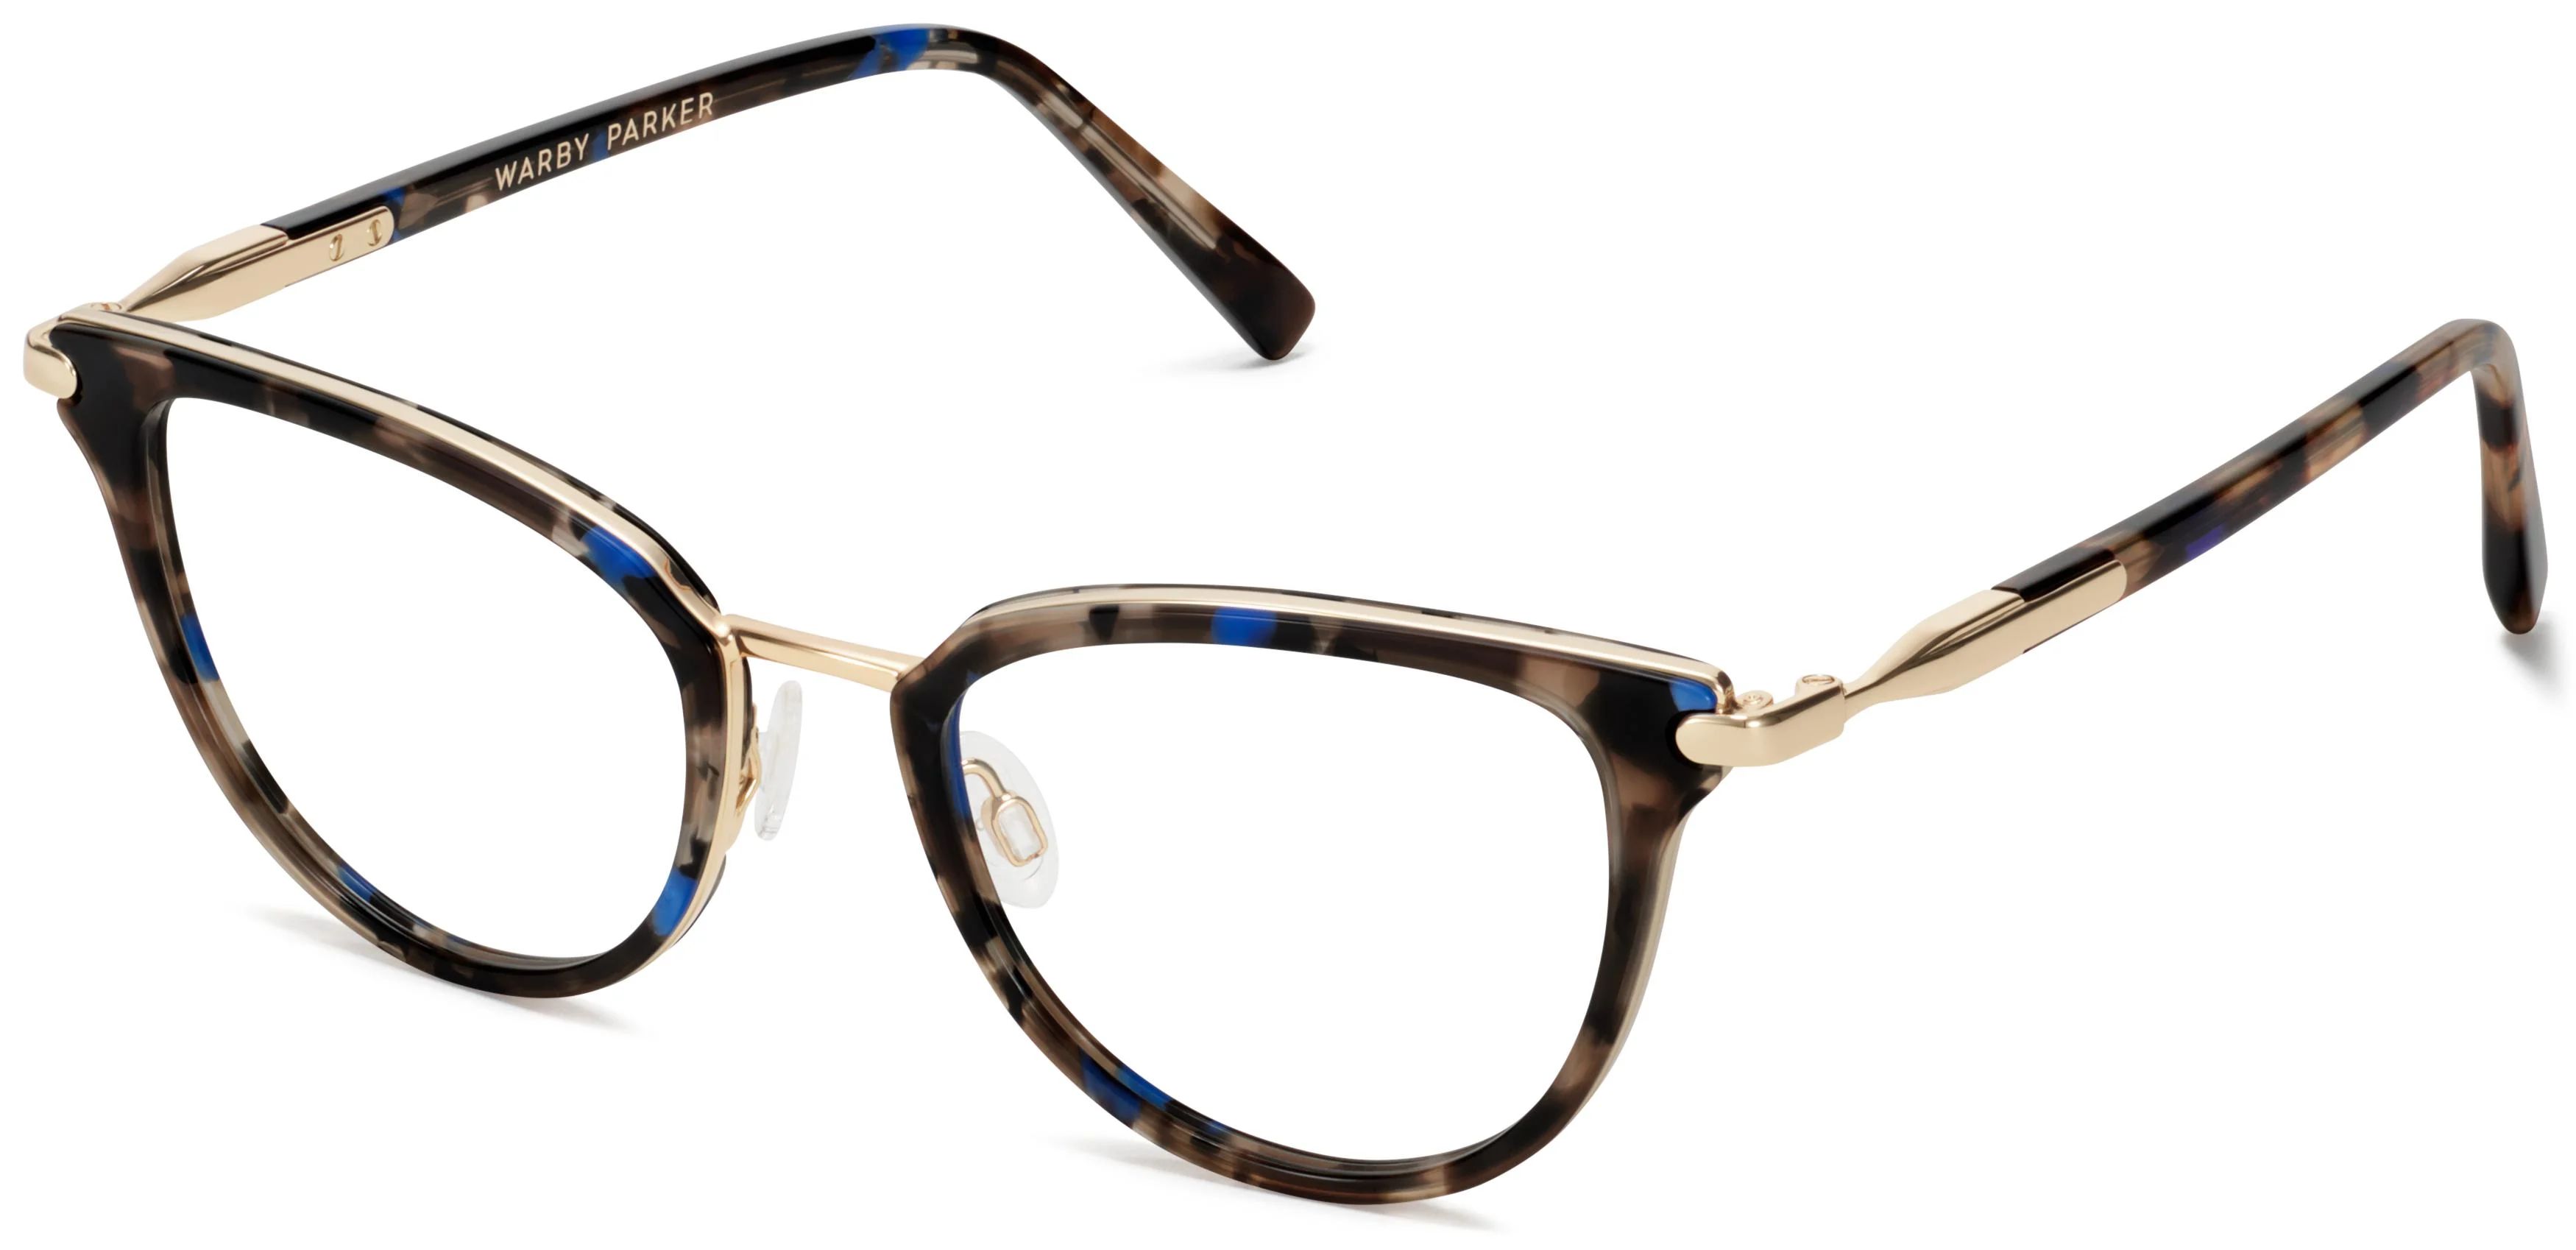 Toula Eyeglasses in Tanzanite Tortoise with Polished Gold | Warby Parker | Warby Parker (US)